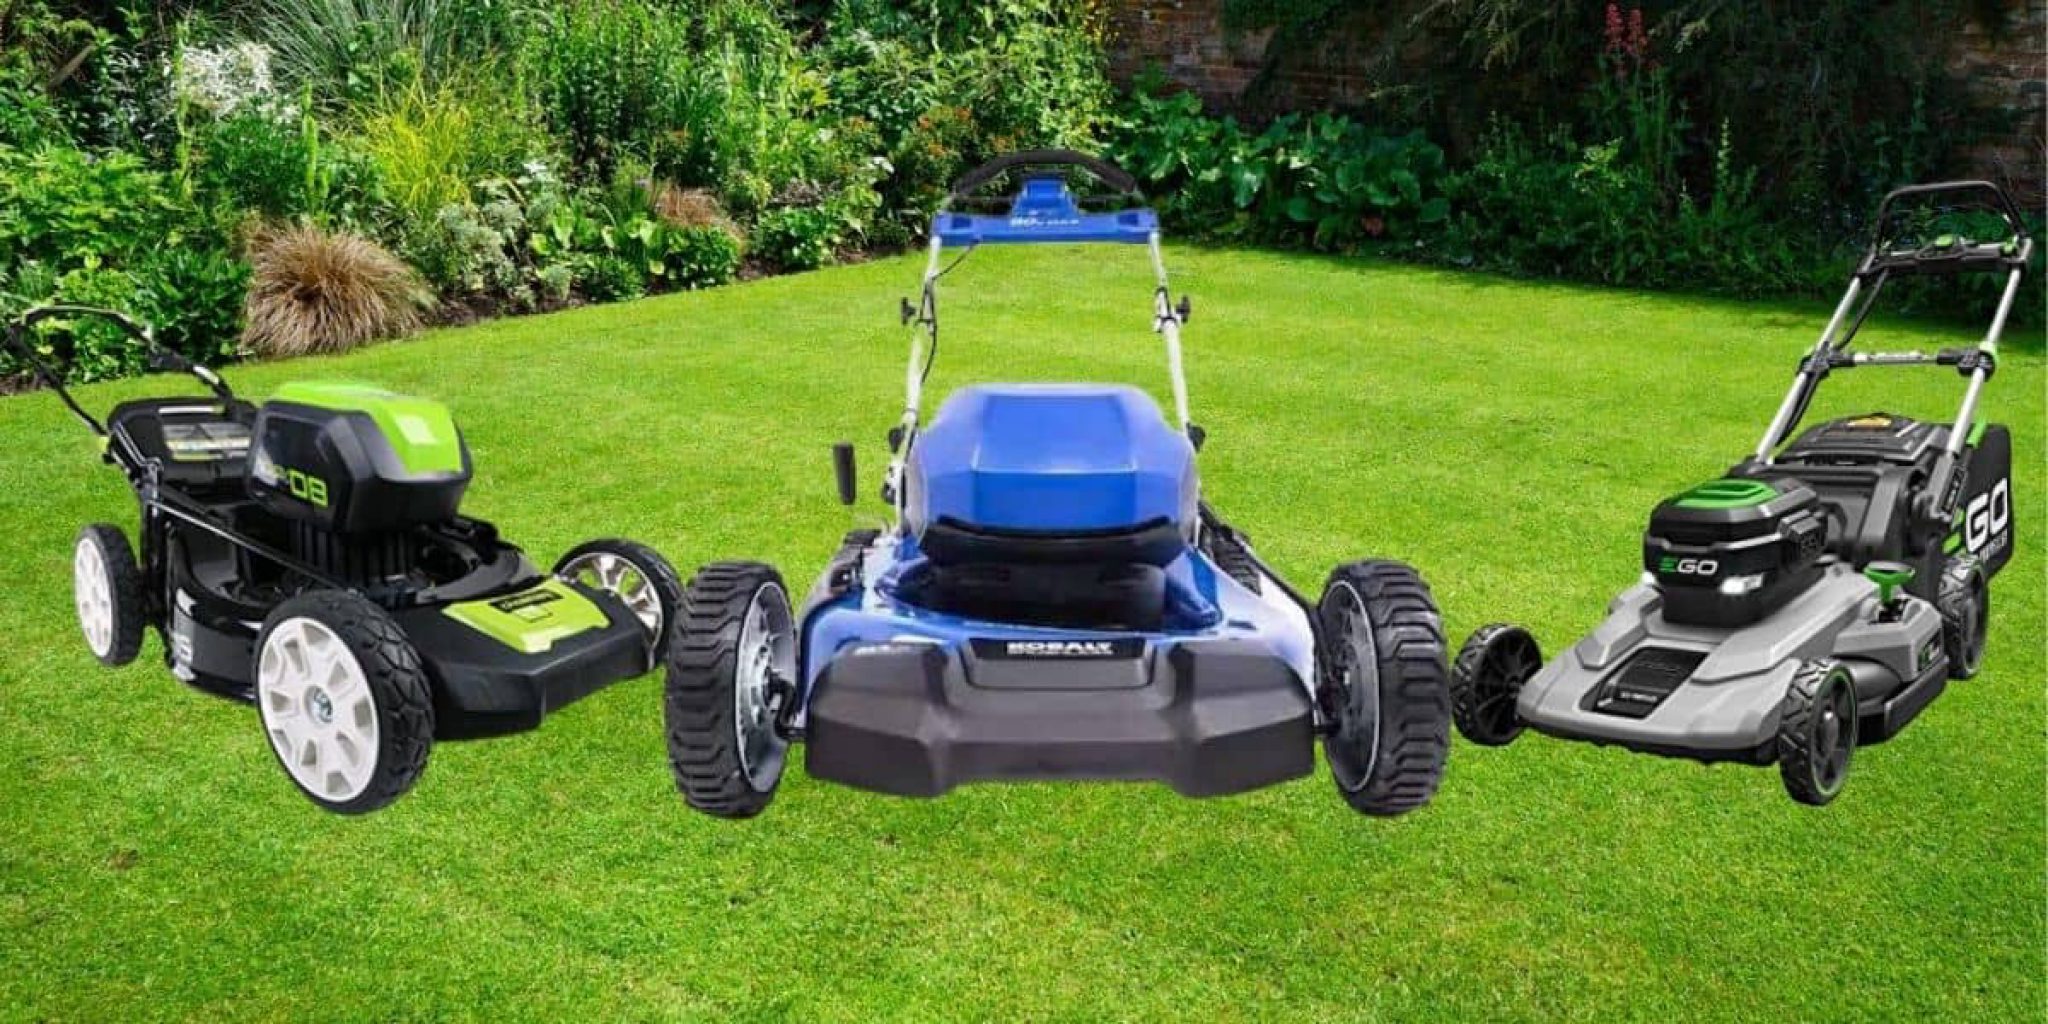 Best Electric Riding Lawn Mower 2021 at Riding Lawn Mower